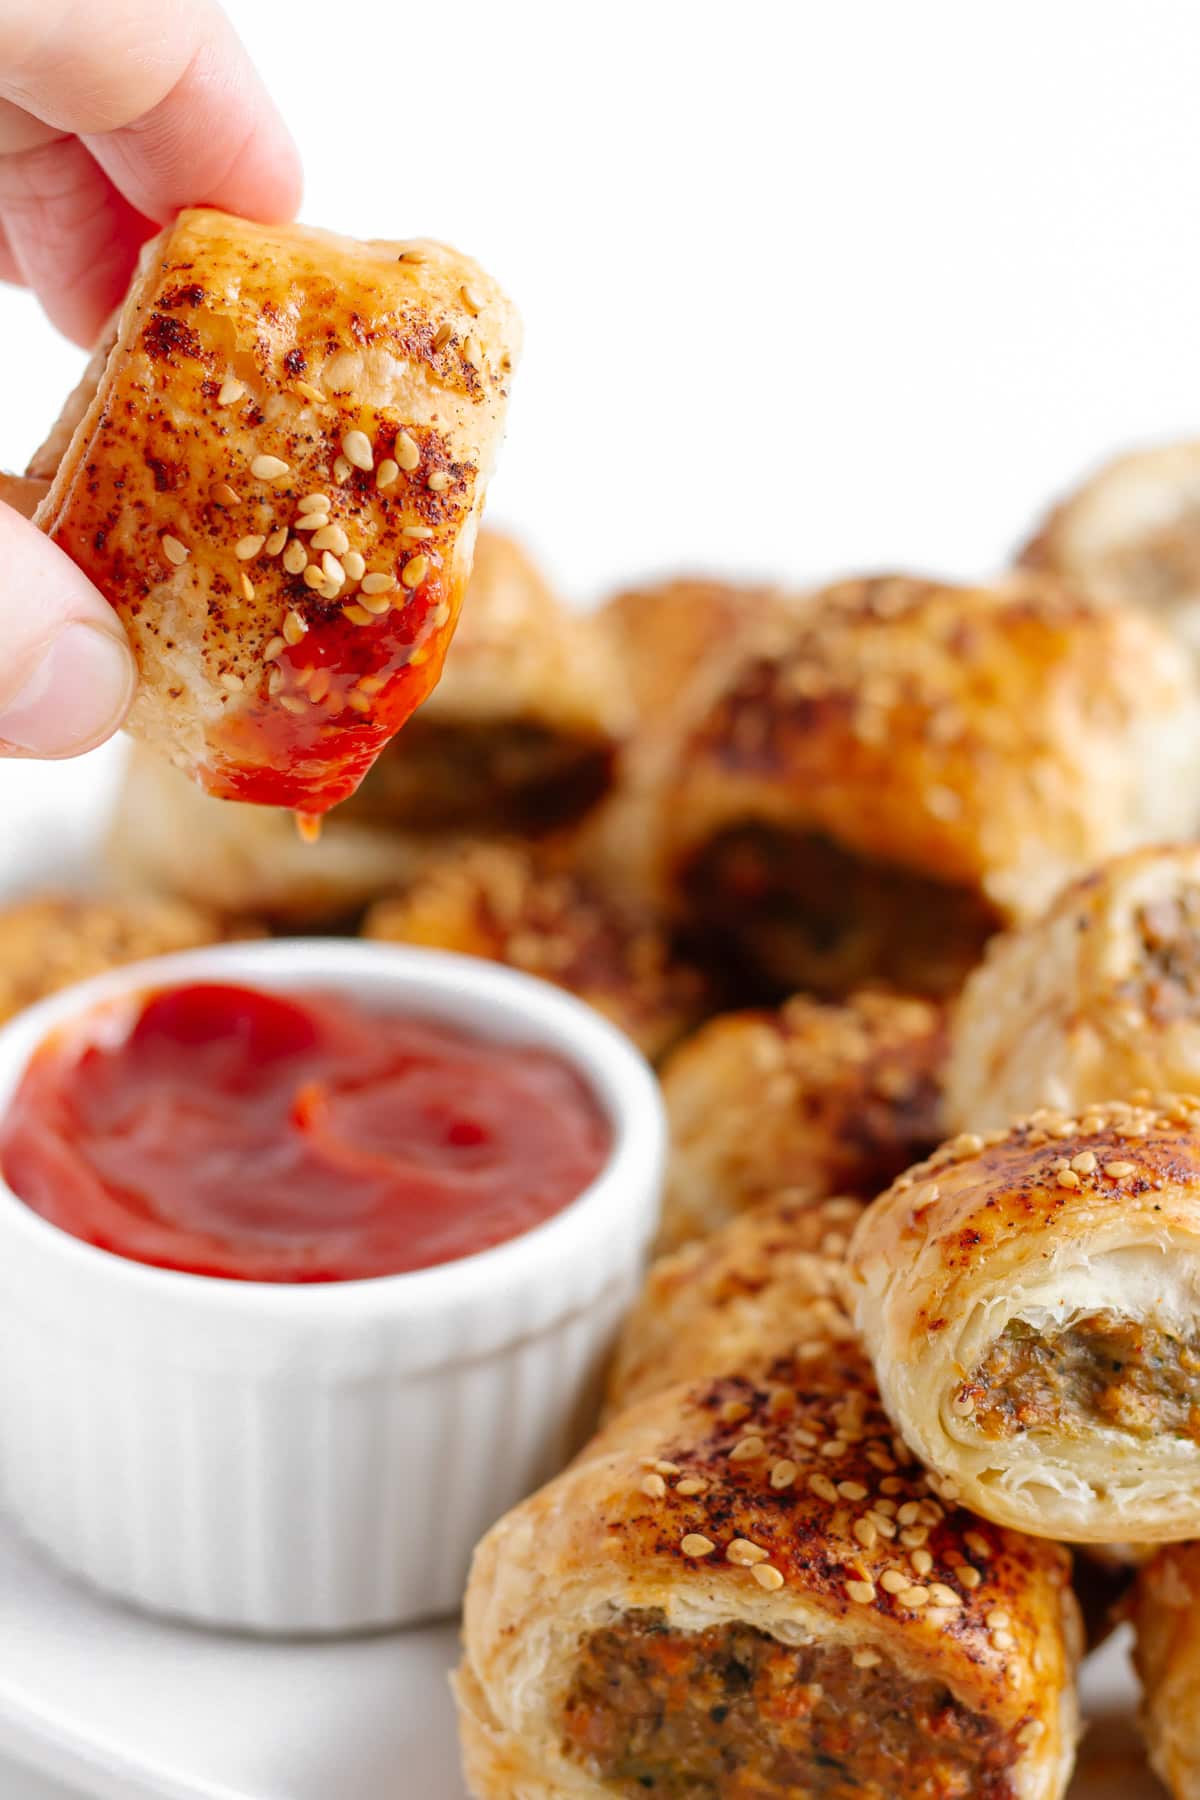 Hand dipping a chicken sausage roll in bowl of ketchup.